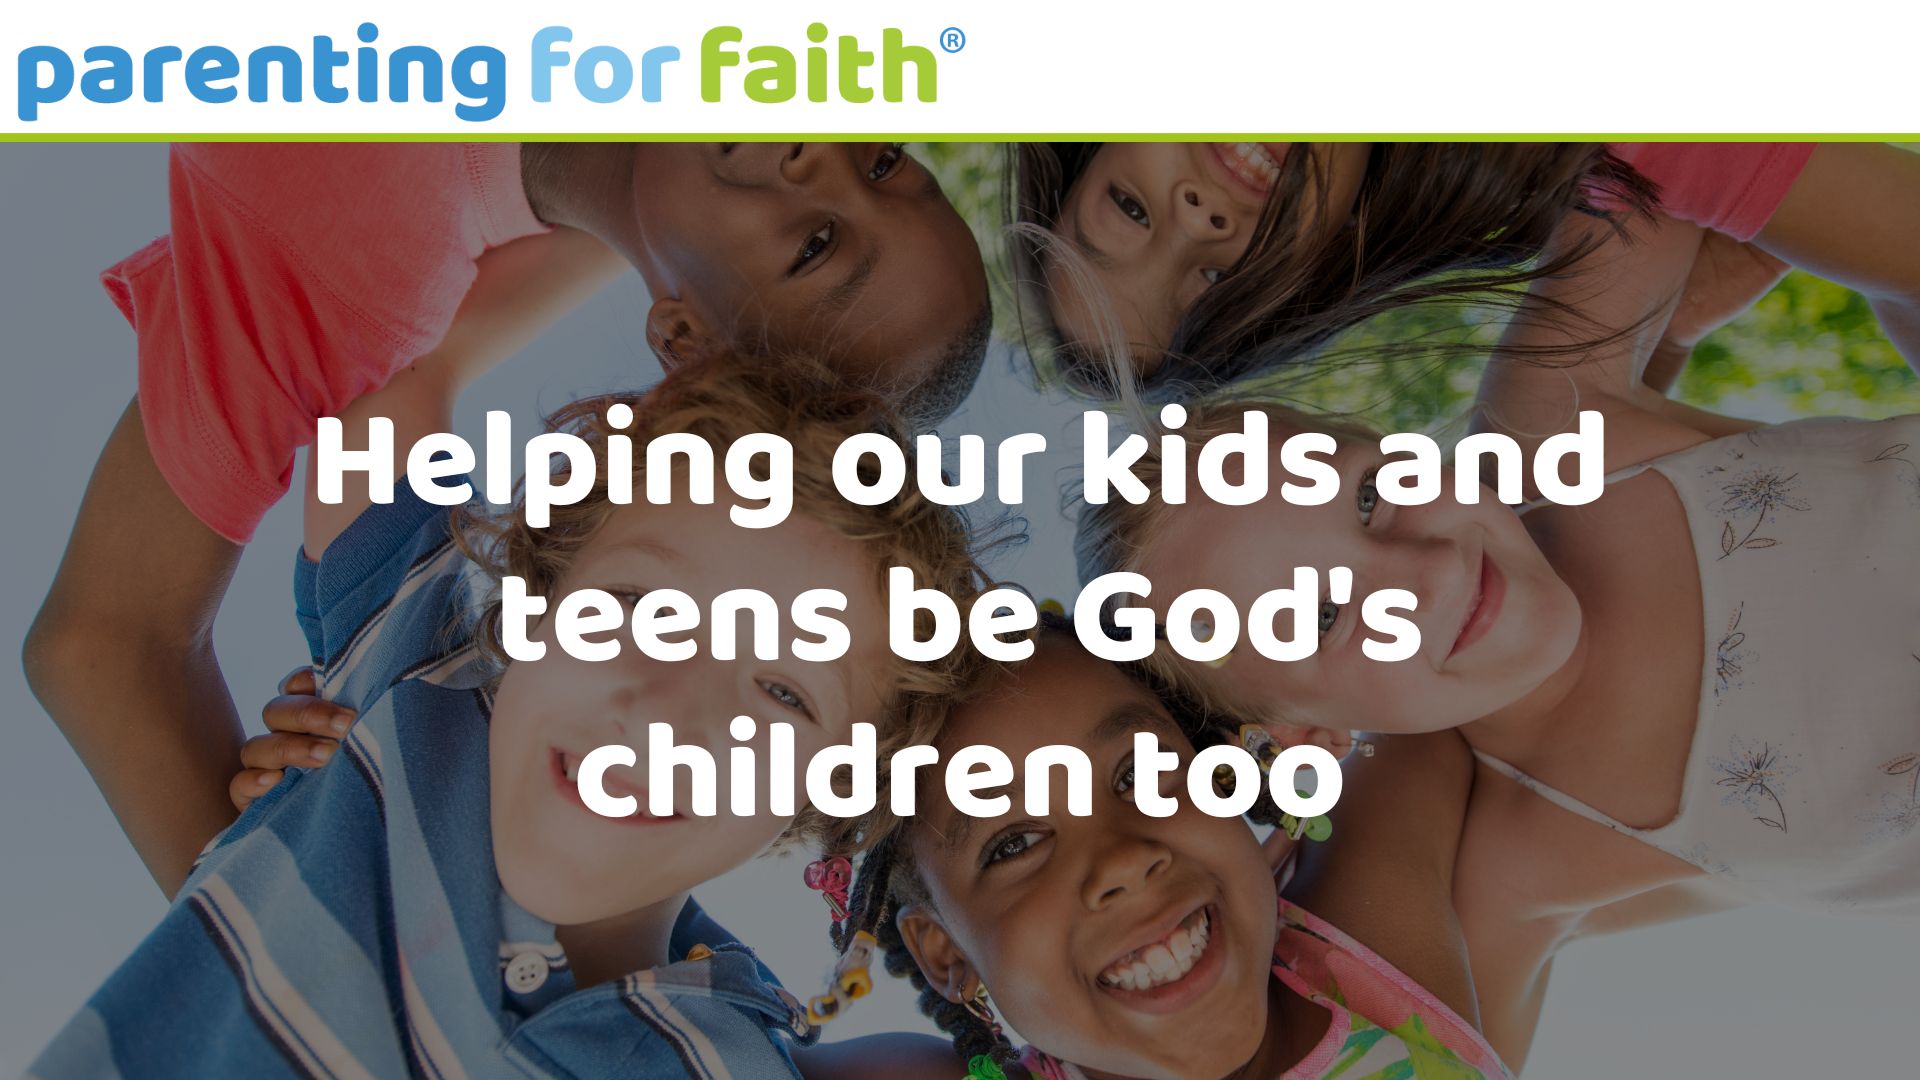 Helping our kids and teens be God's children too image credit Fat Camera from Getty Images Signature